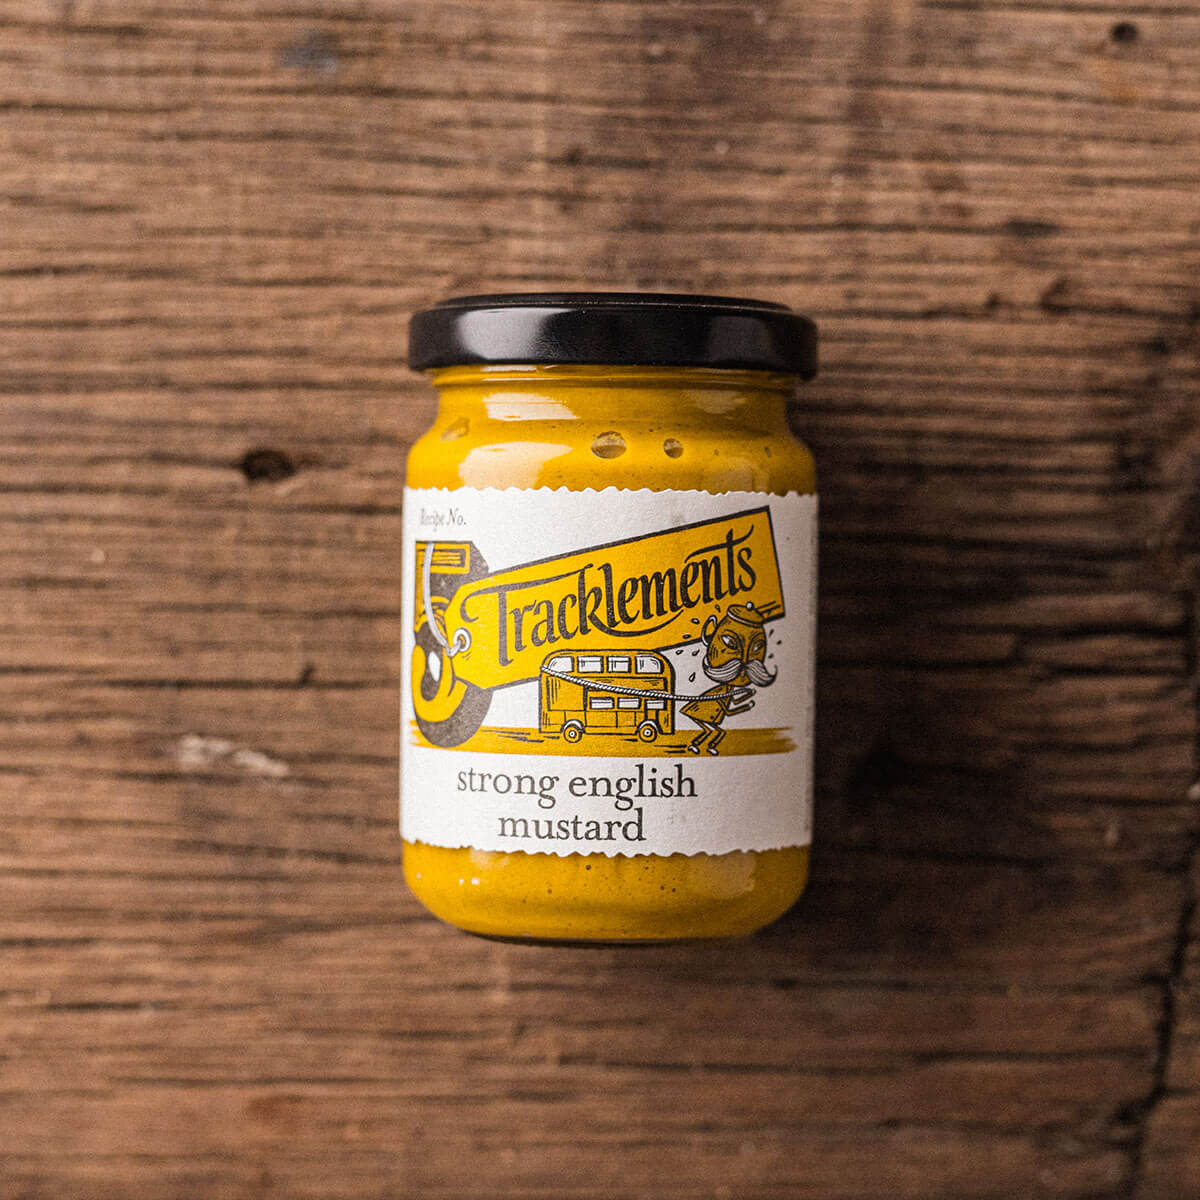 Tracklements Mustard